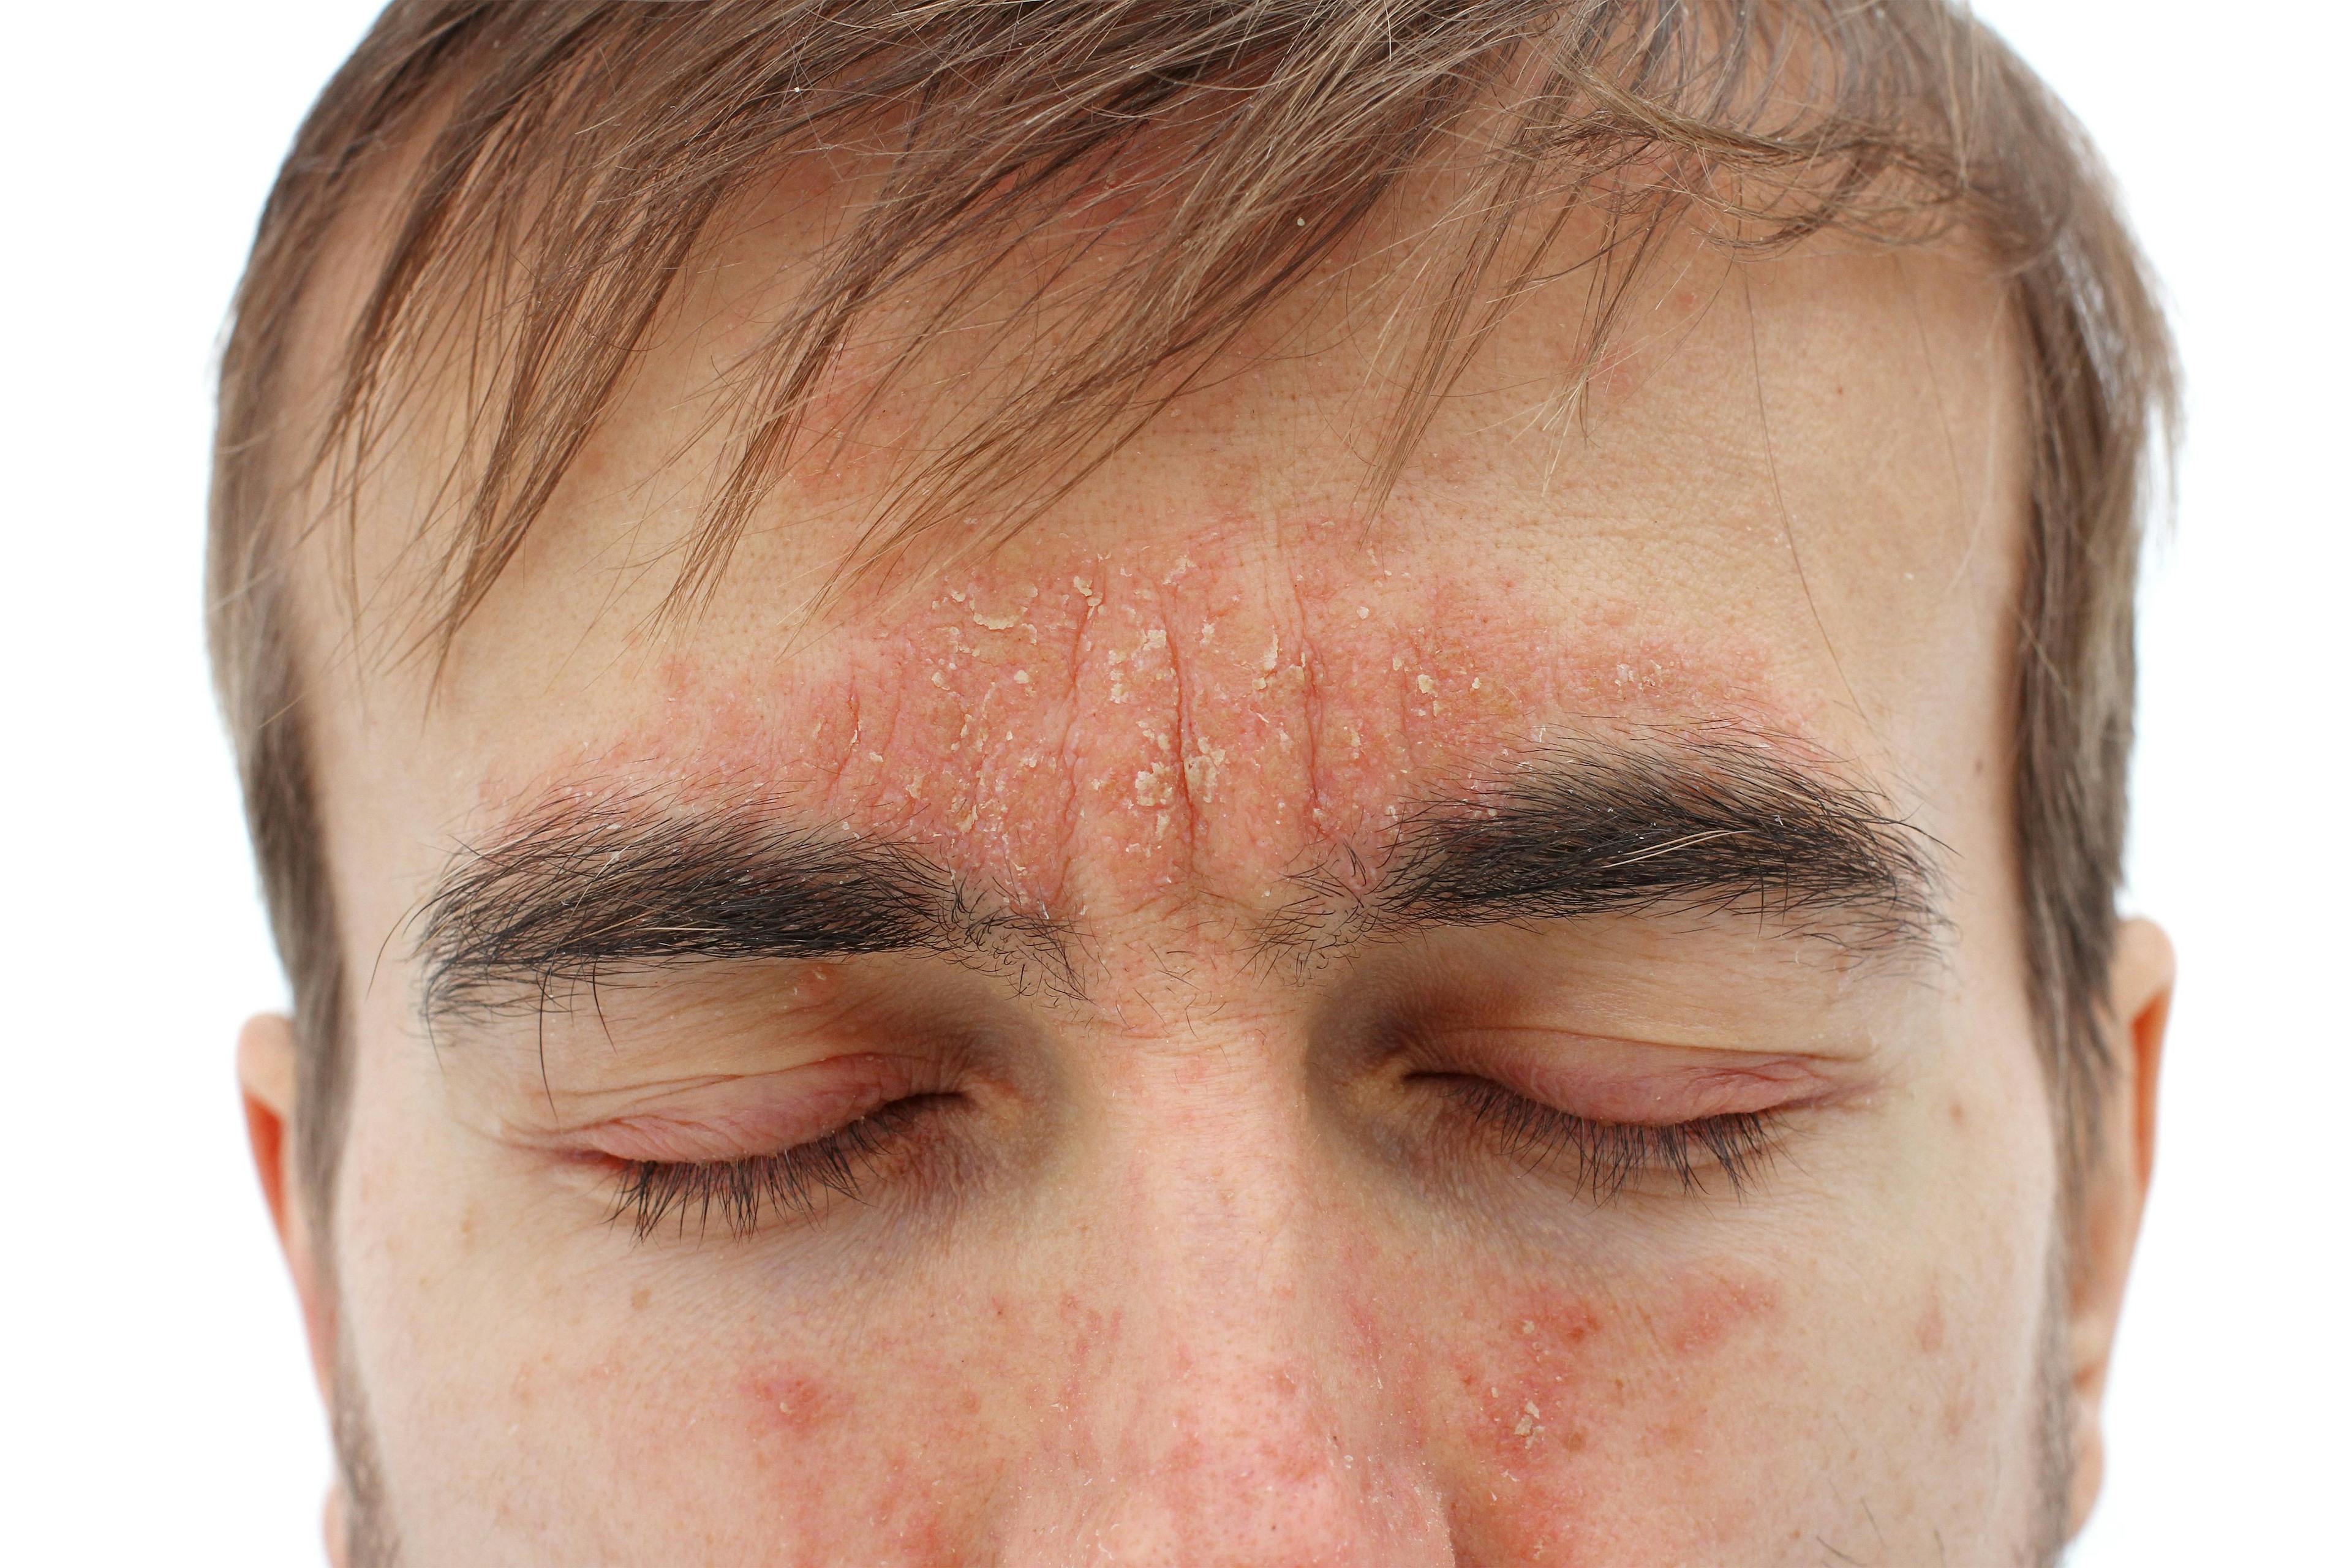 Atopic Dermatitis Identified as Possible Risk Factor for Headache Disorders, Migraine